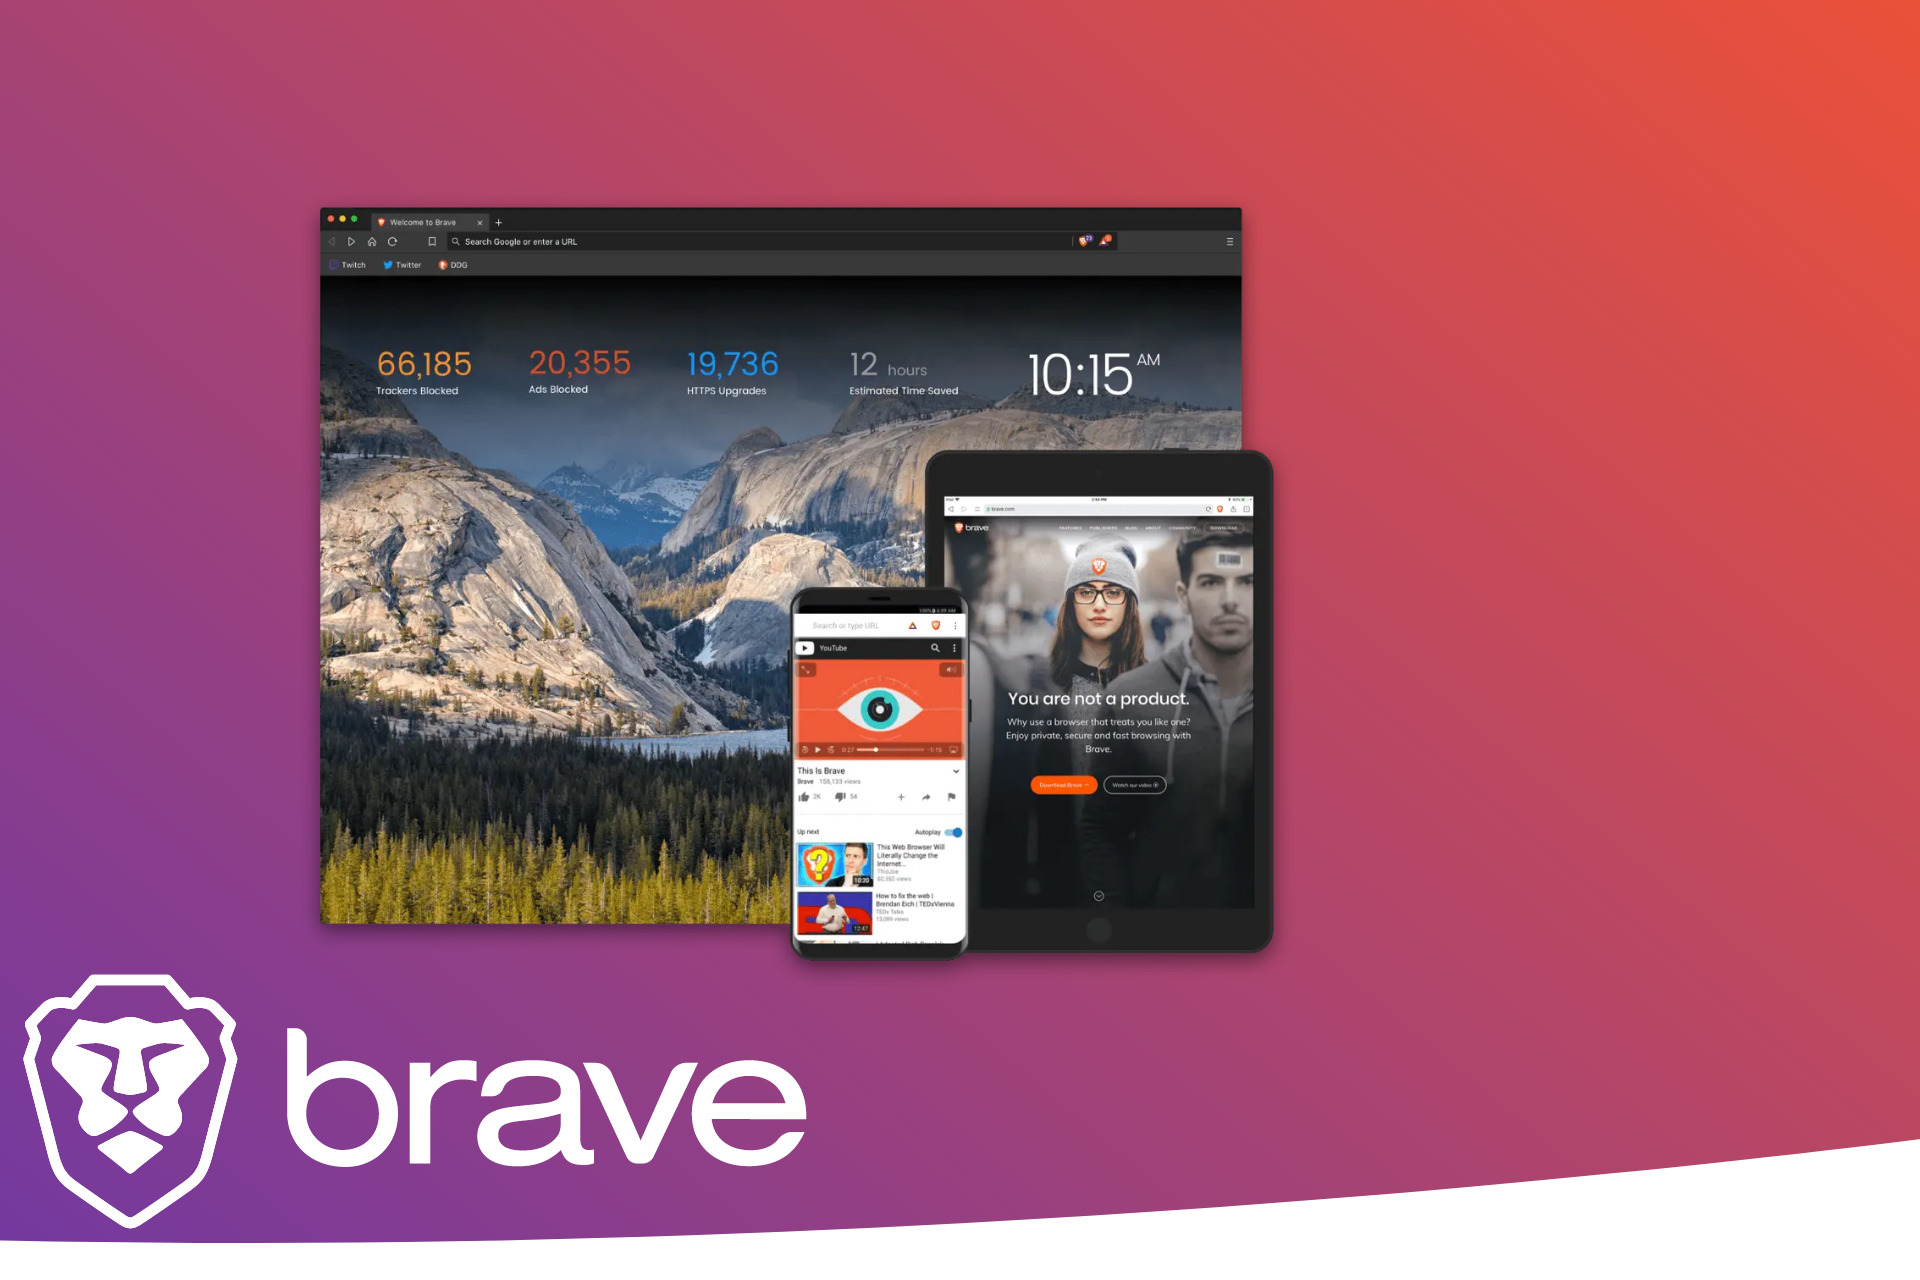 how to install brave browser on mac